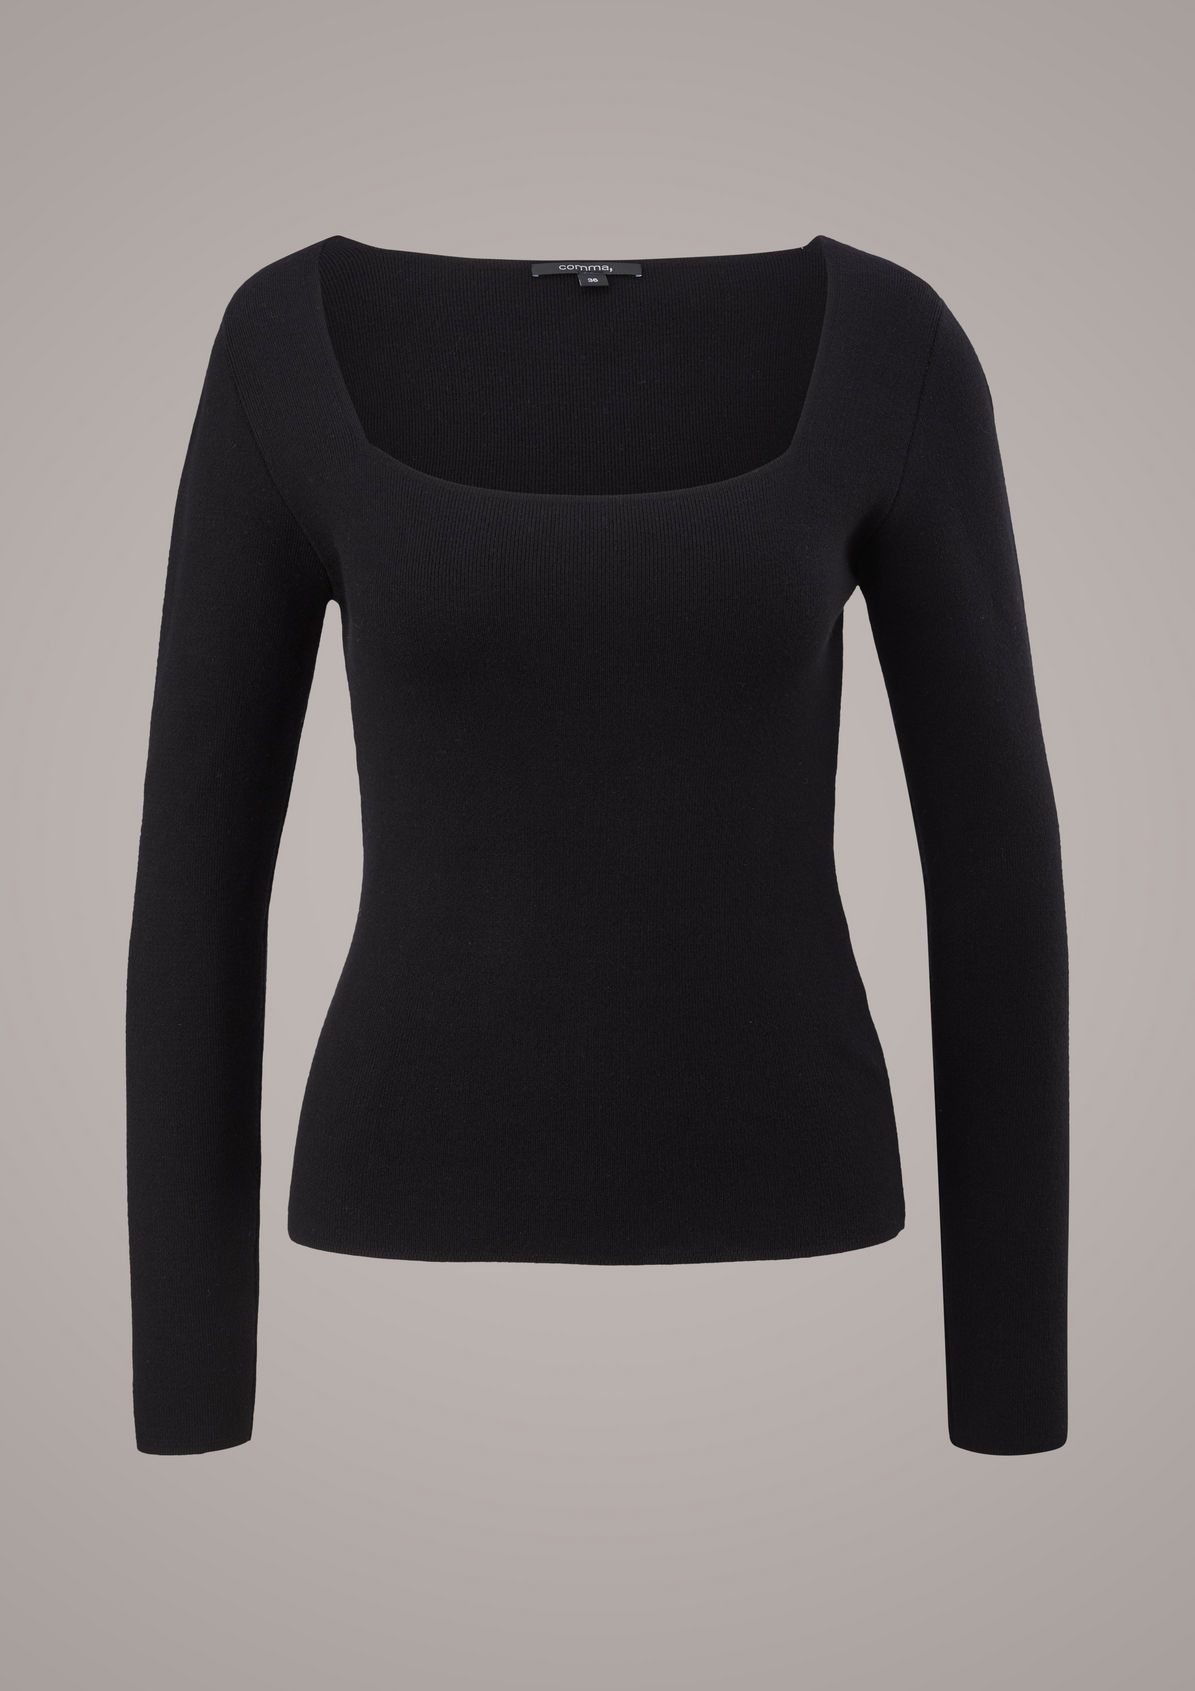 Jumper with reinforced shoulders from comma